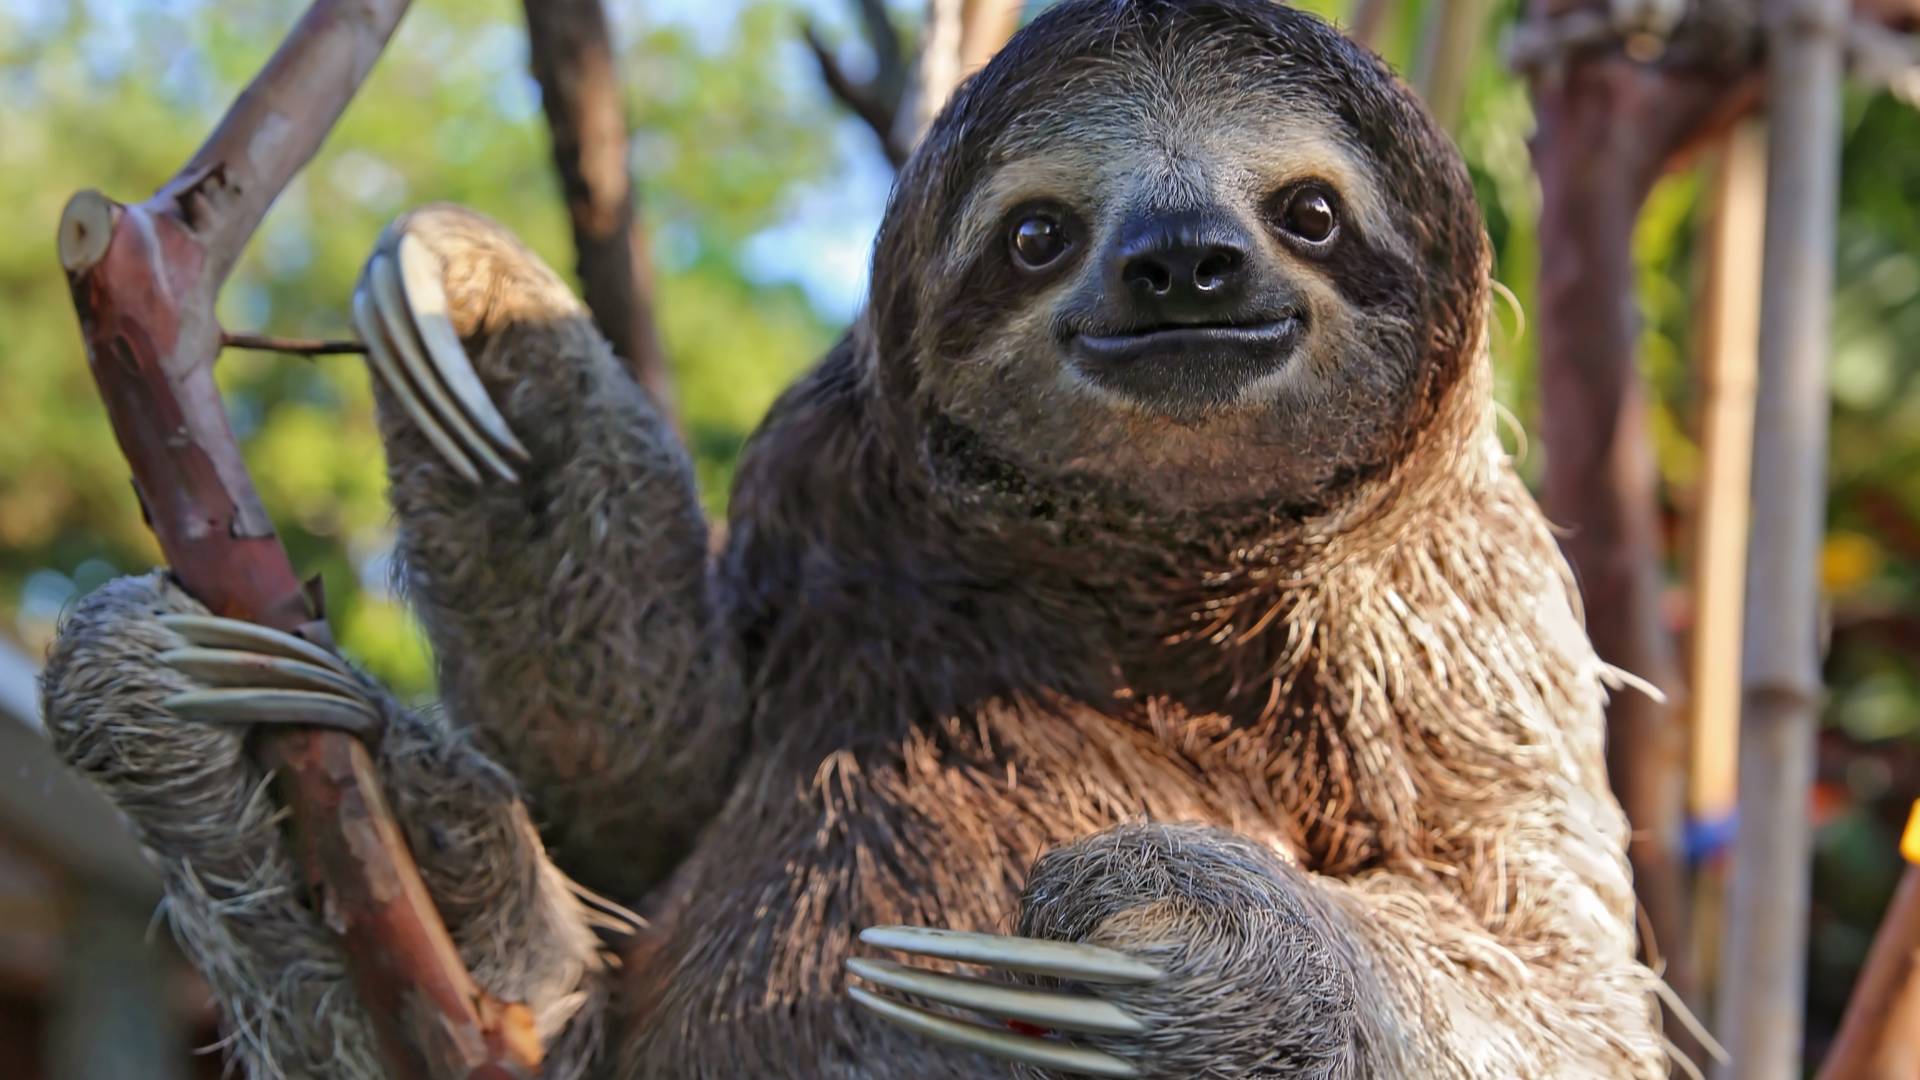 Closeup of a sloth holding a branch in Tamarindo Costa Rica.